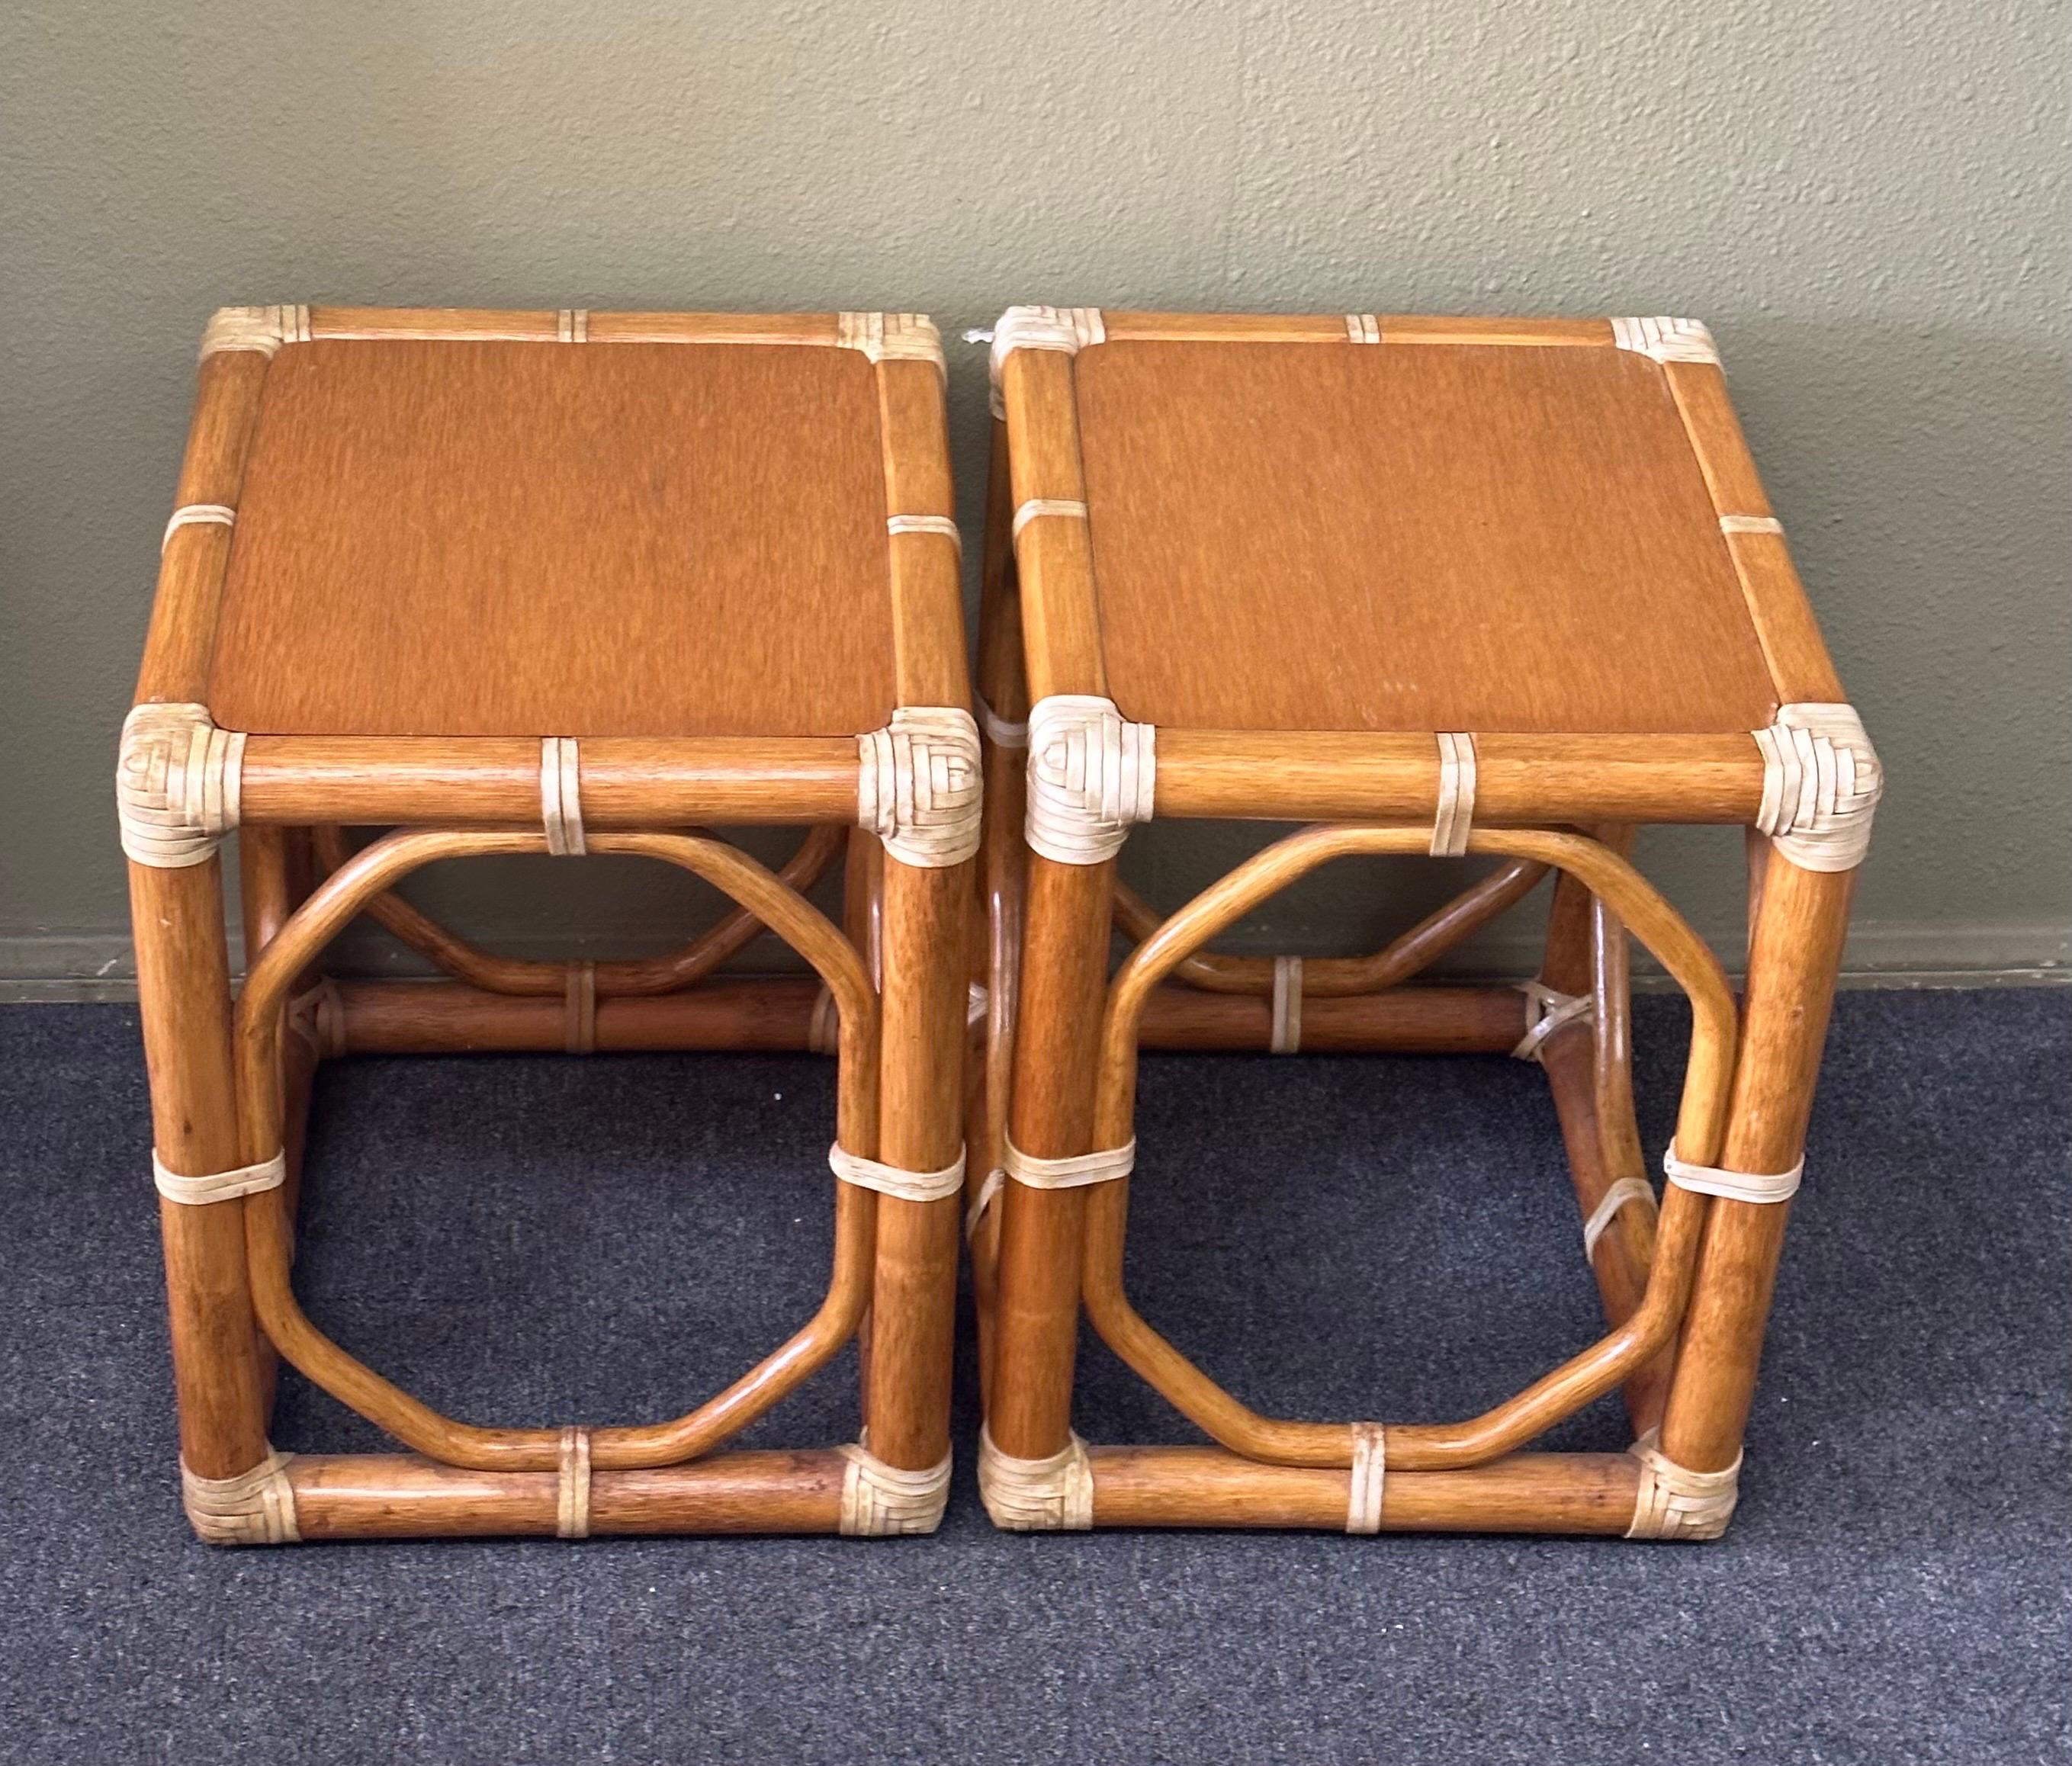 20th Century Pair of  Oak & Rattan Side Tables / Stools by McGuire Furniture Co.  For Sale